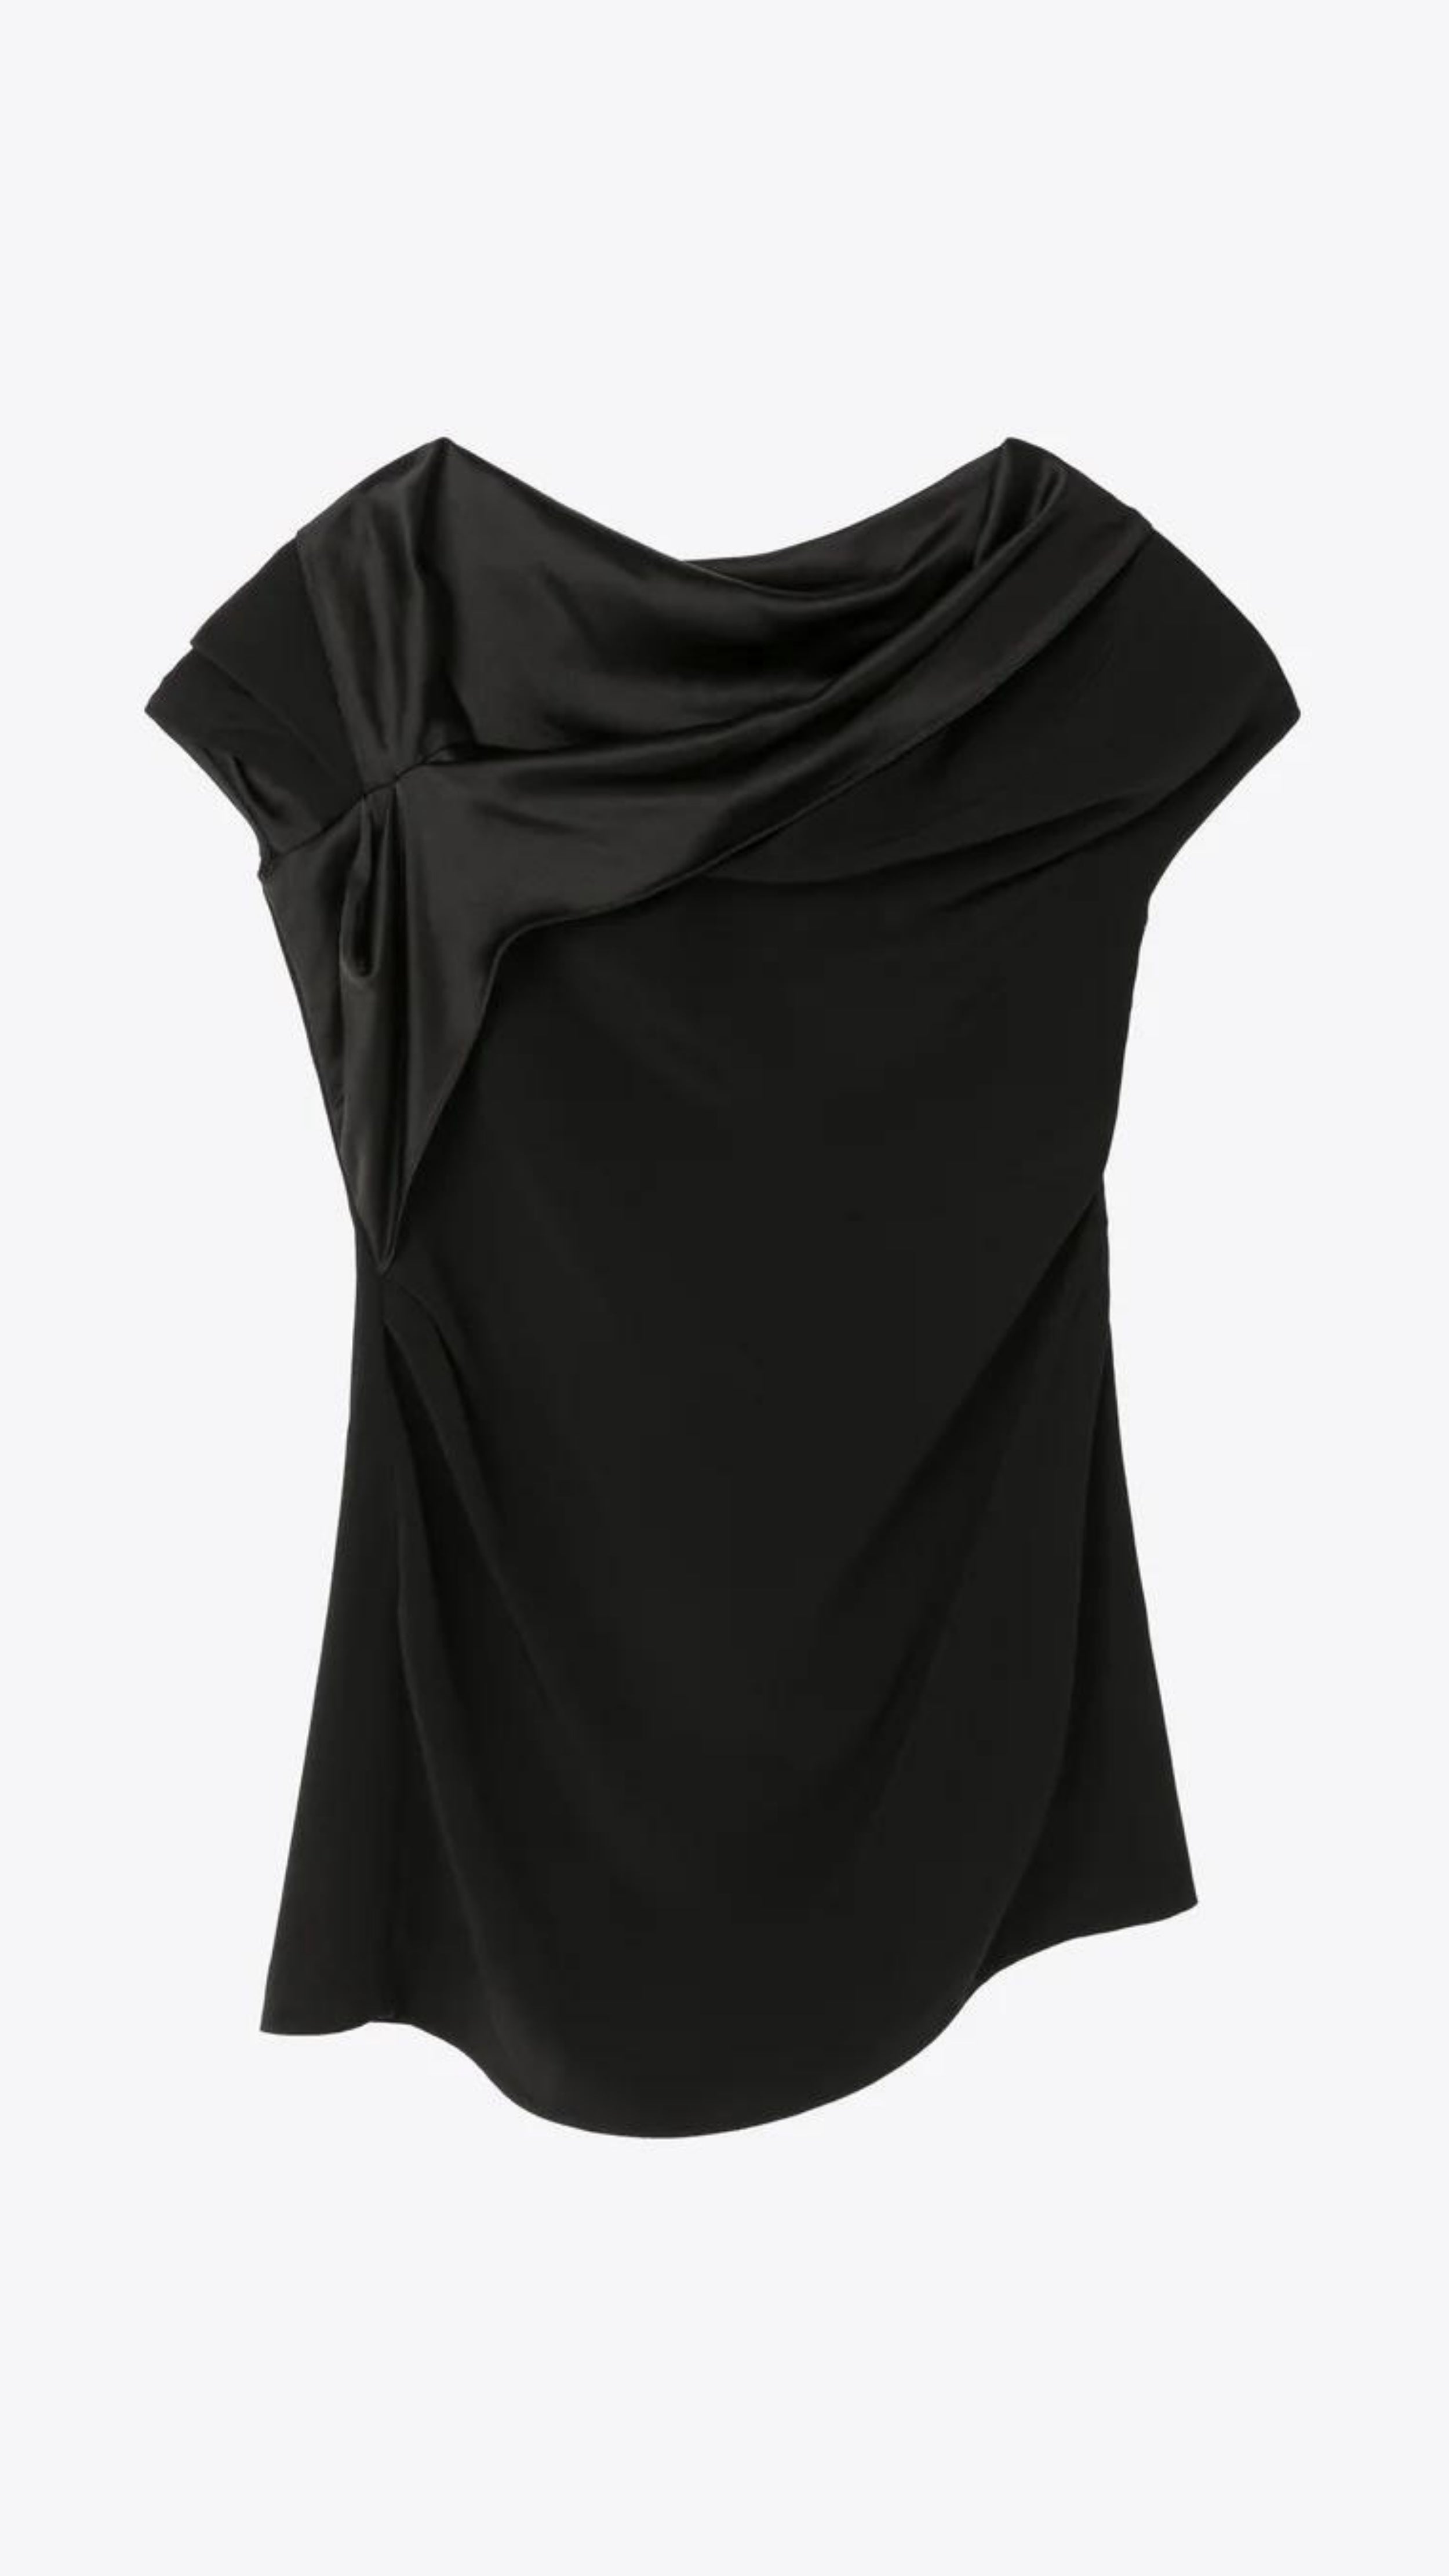 AZ Factory Colville Molly Molloy Lucinda Chambers, Draped Satin Top. Draped satin top with matte and shine satine fabric. Asymmetrical across the top to provide an off the shoulder style on one side. Product photo shown from the front.